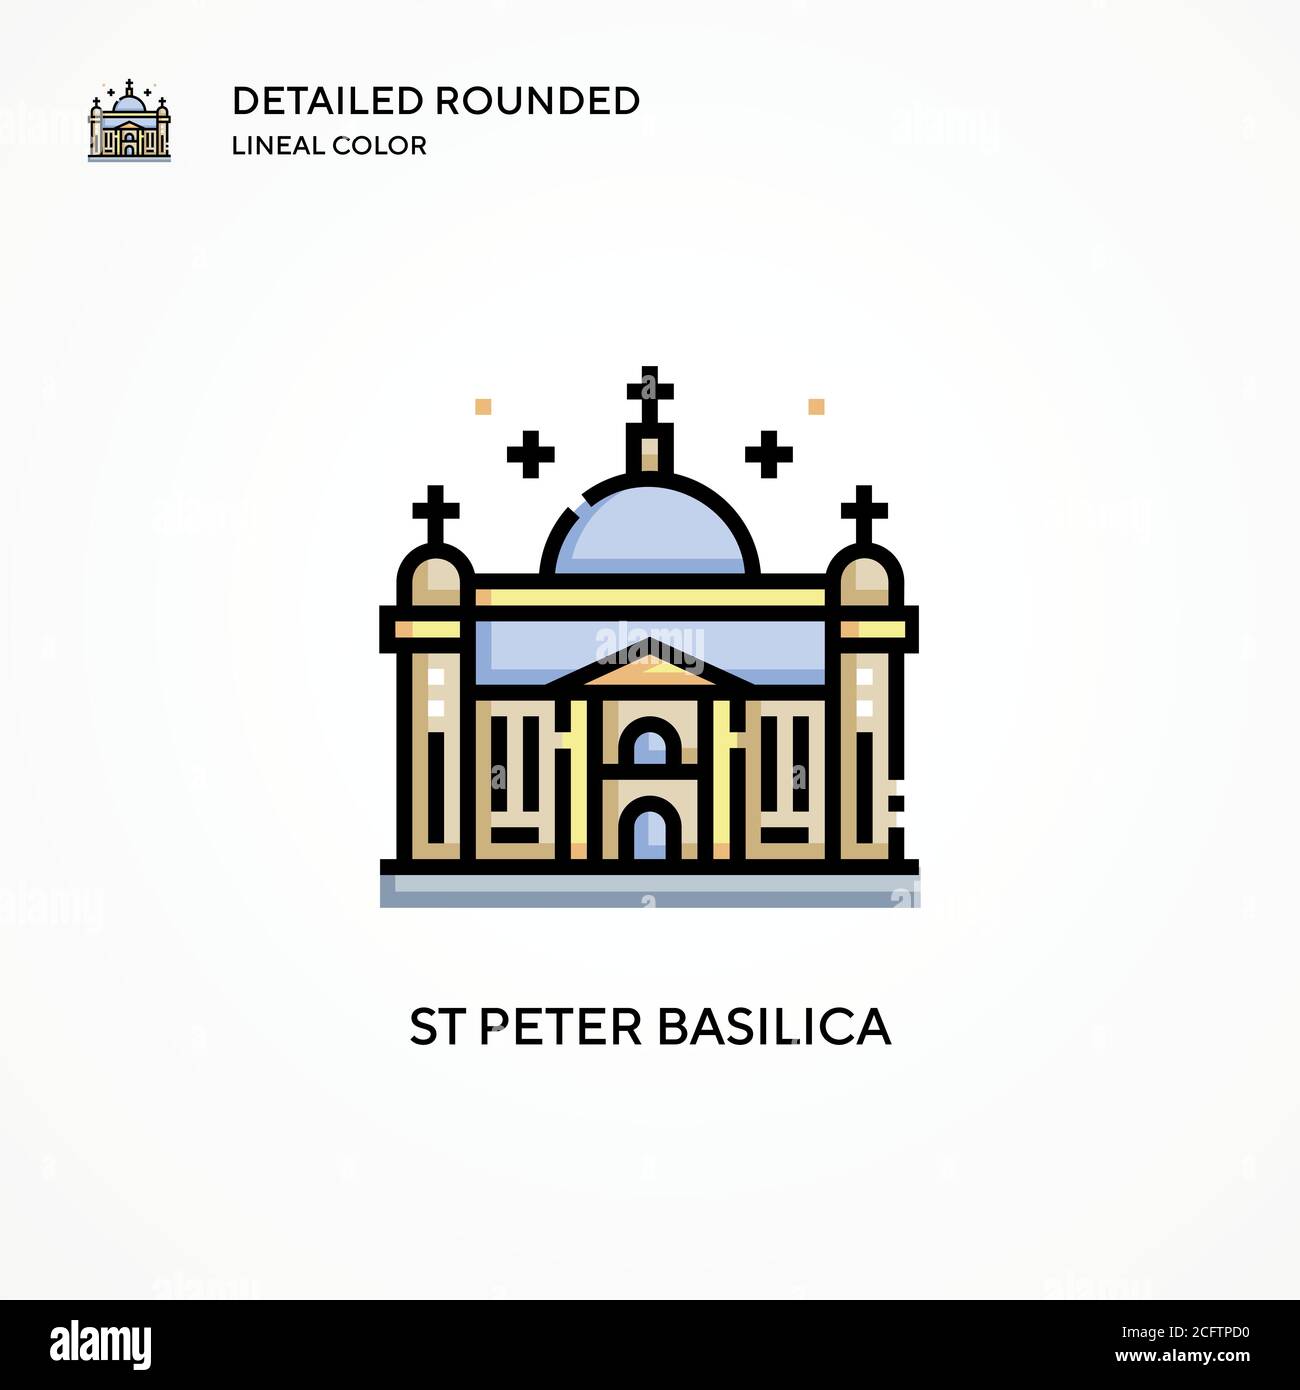 St peter basilica vector icon. Modern vector illustration concepts. Easy to edit and customize. Stock Vector